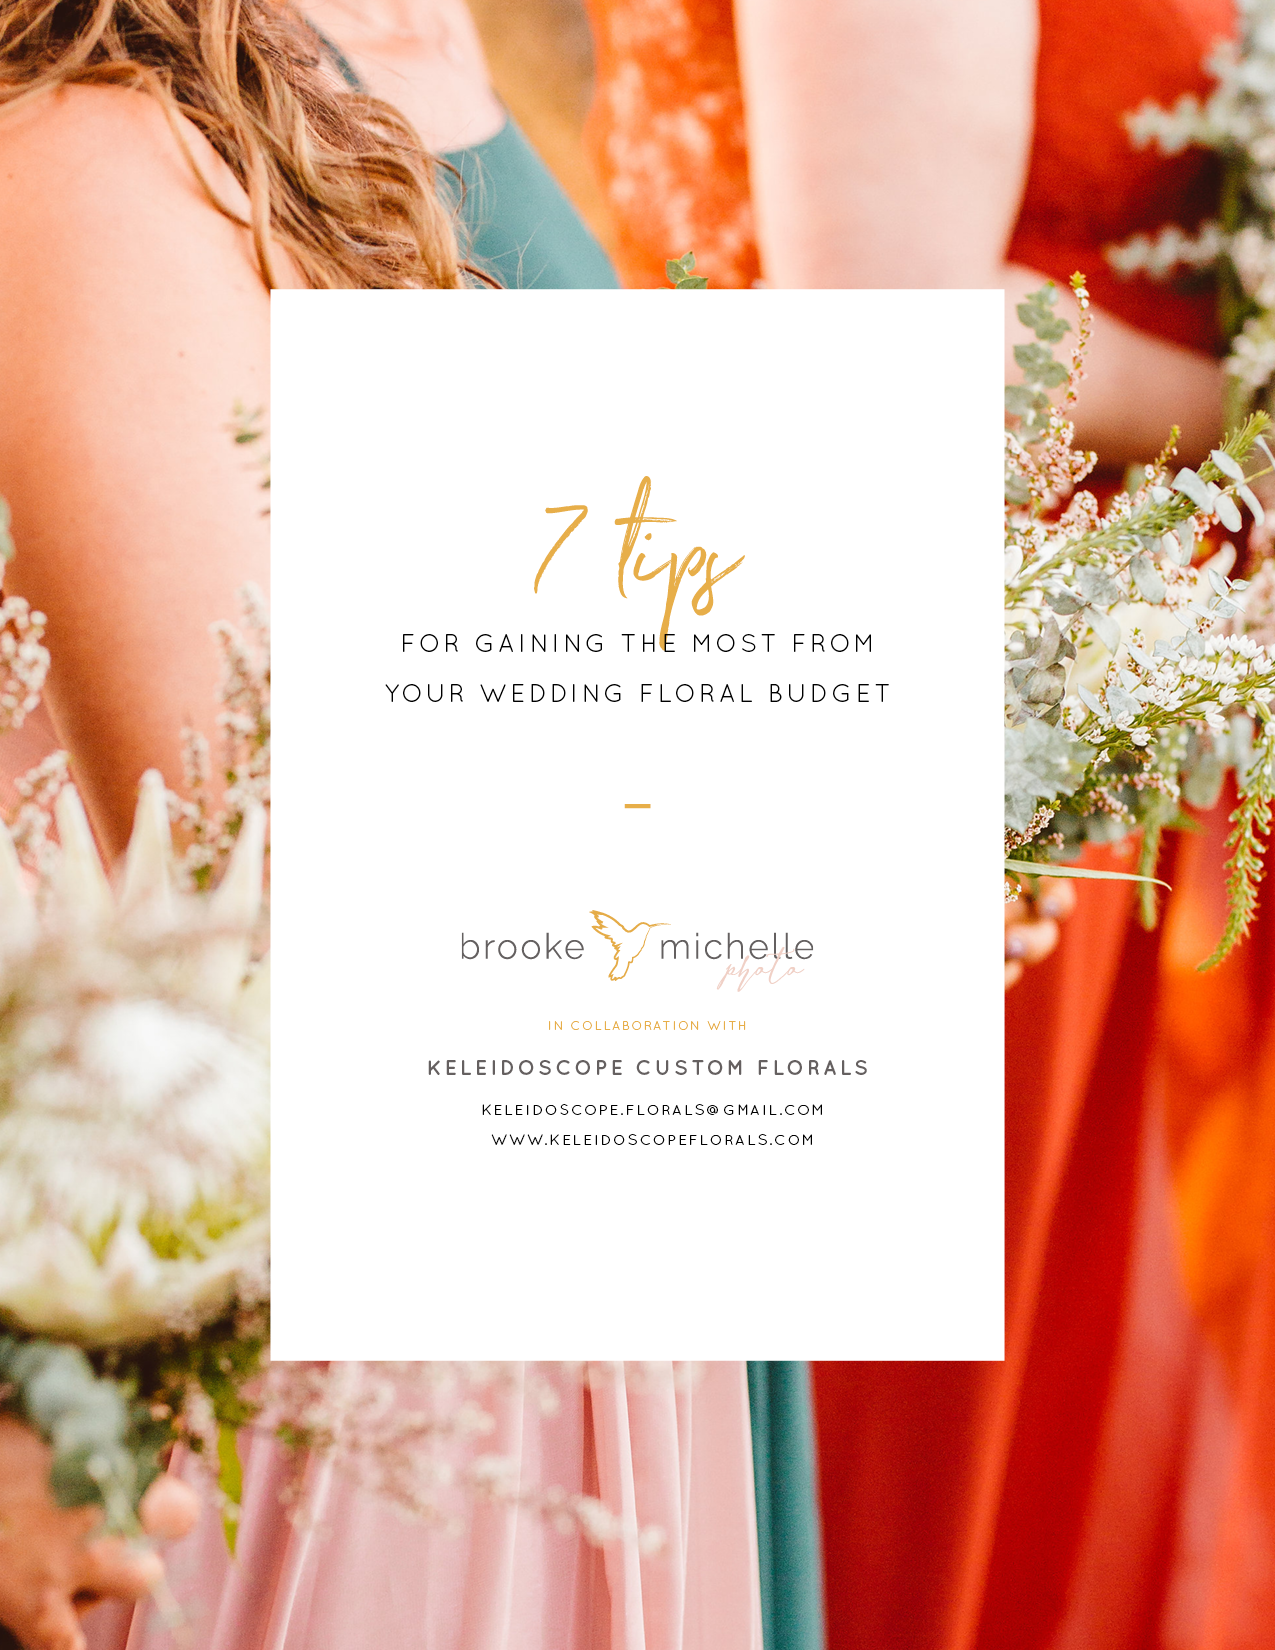 7 Tips for Gaining The Most from Your Wedding Floral Budget - Wedding Money Saver Tips - Brooke Michelle Photography x Keleidoscope Custom Florals